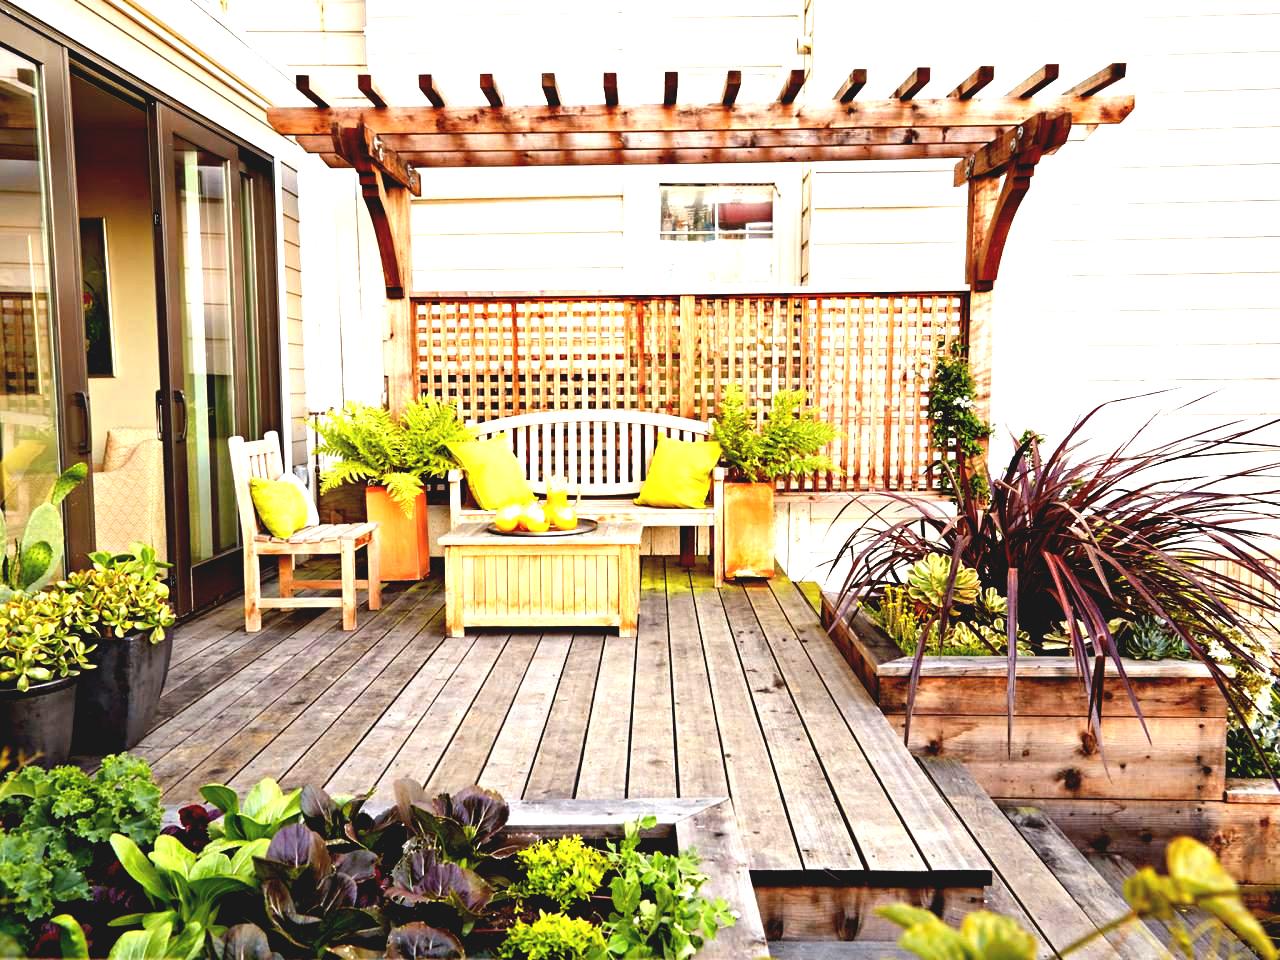 MAKING THE MOST OF YOUR PATIO SPACE - Princeton Real Estate